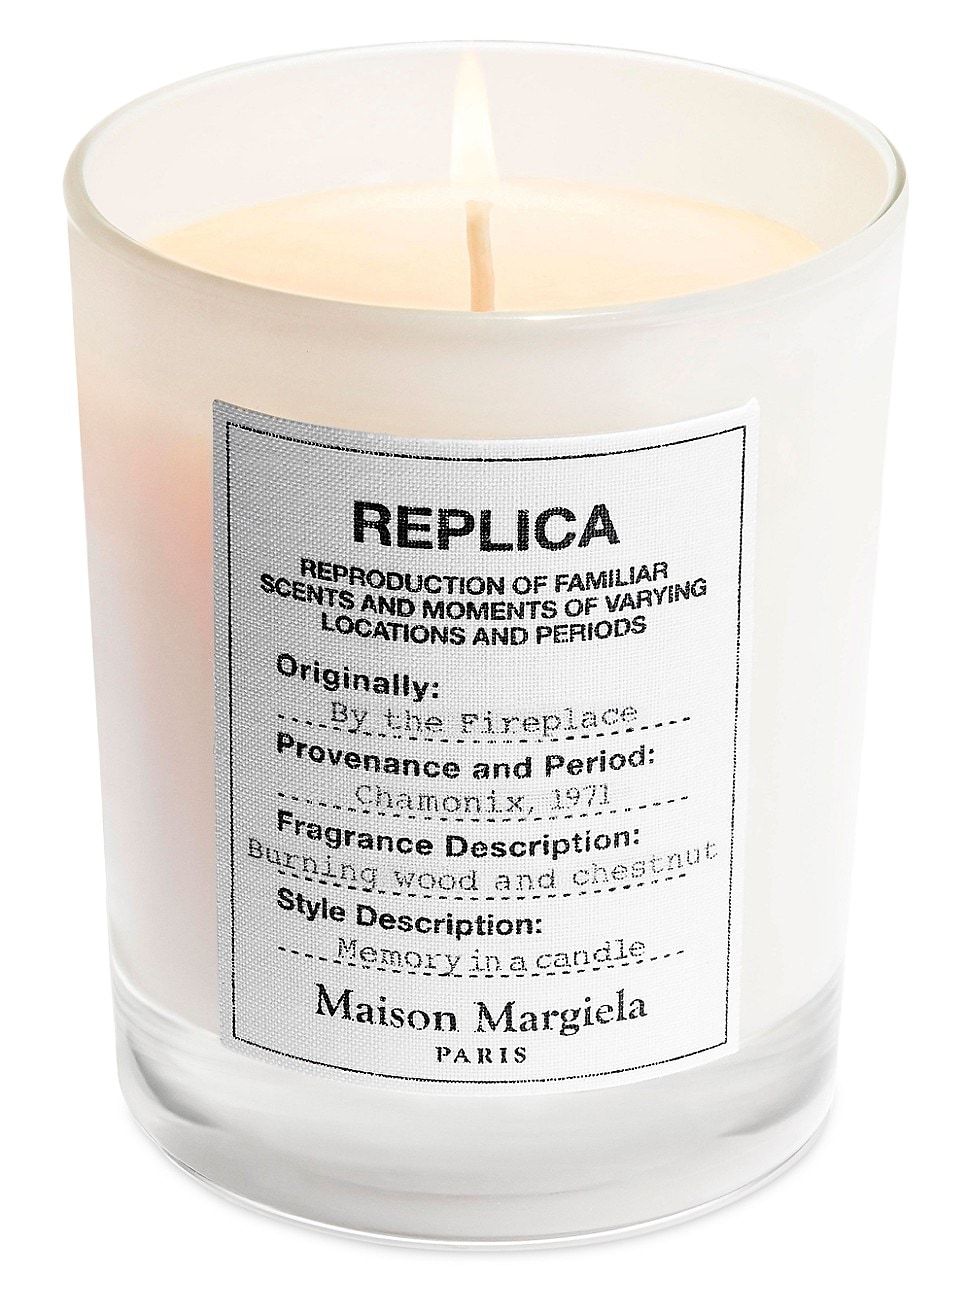 Replica By The Fireplace Scented Candle - Size 5.0-6.8 oz. | Saks Fifth Avenue